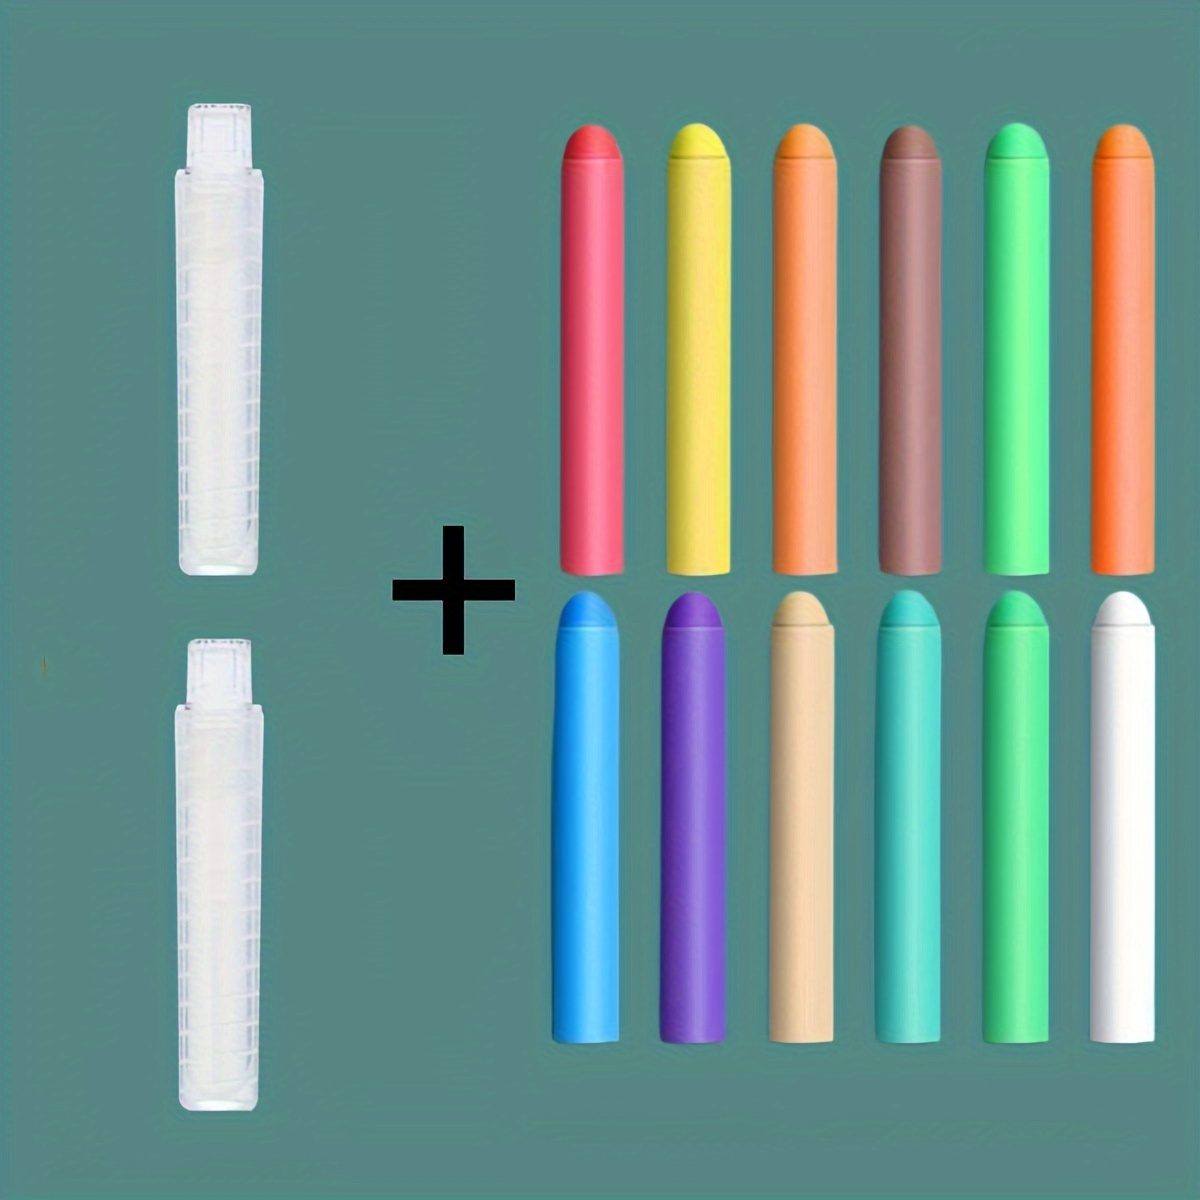 

14pcs (12pcs Colored Chalks + 2pcs Chalk Covers) Water Soluble Erasable Suitable For School Board Book Painting